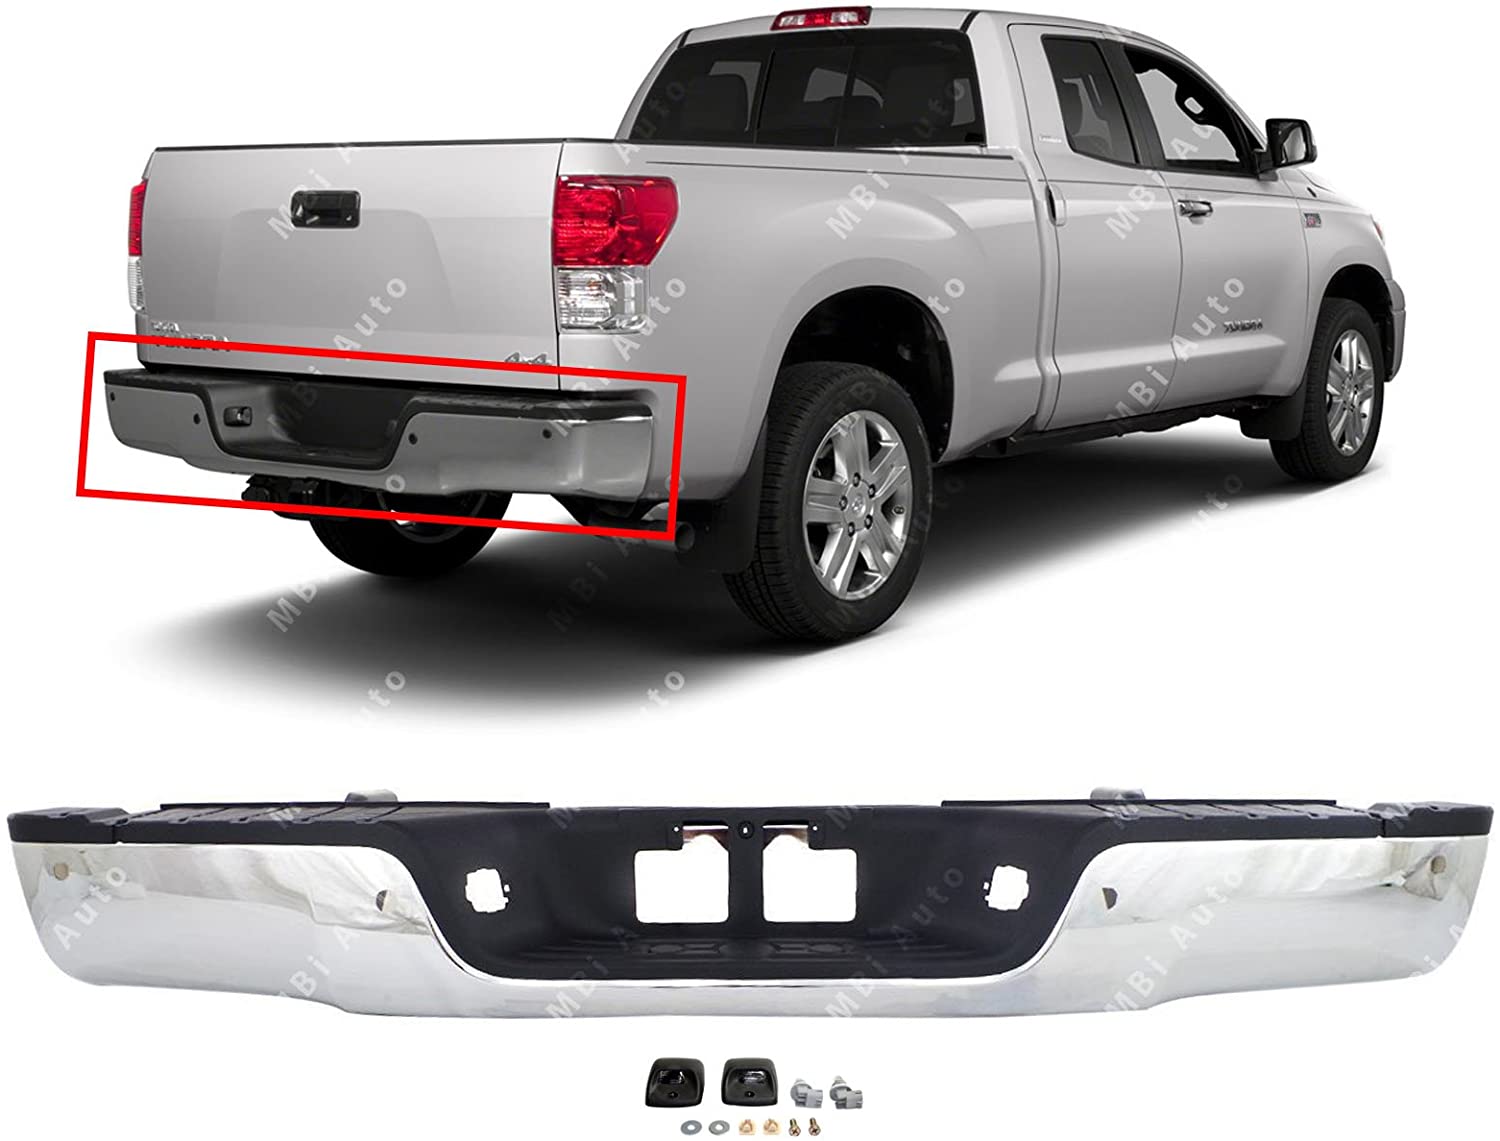 10 Best Bumpers For Toyota Tundra - Wonderful Engineering